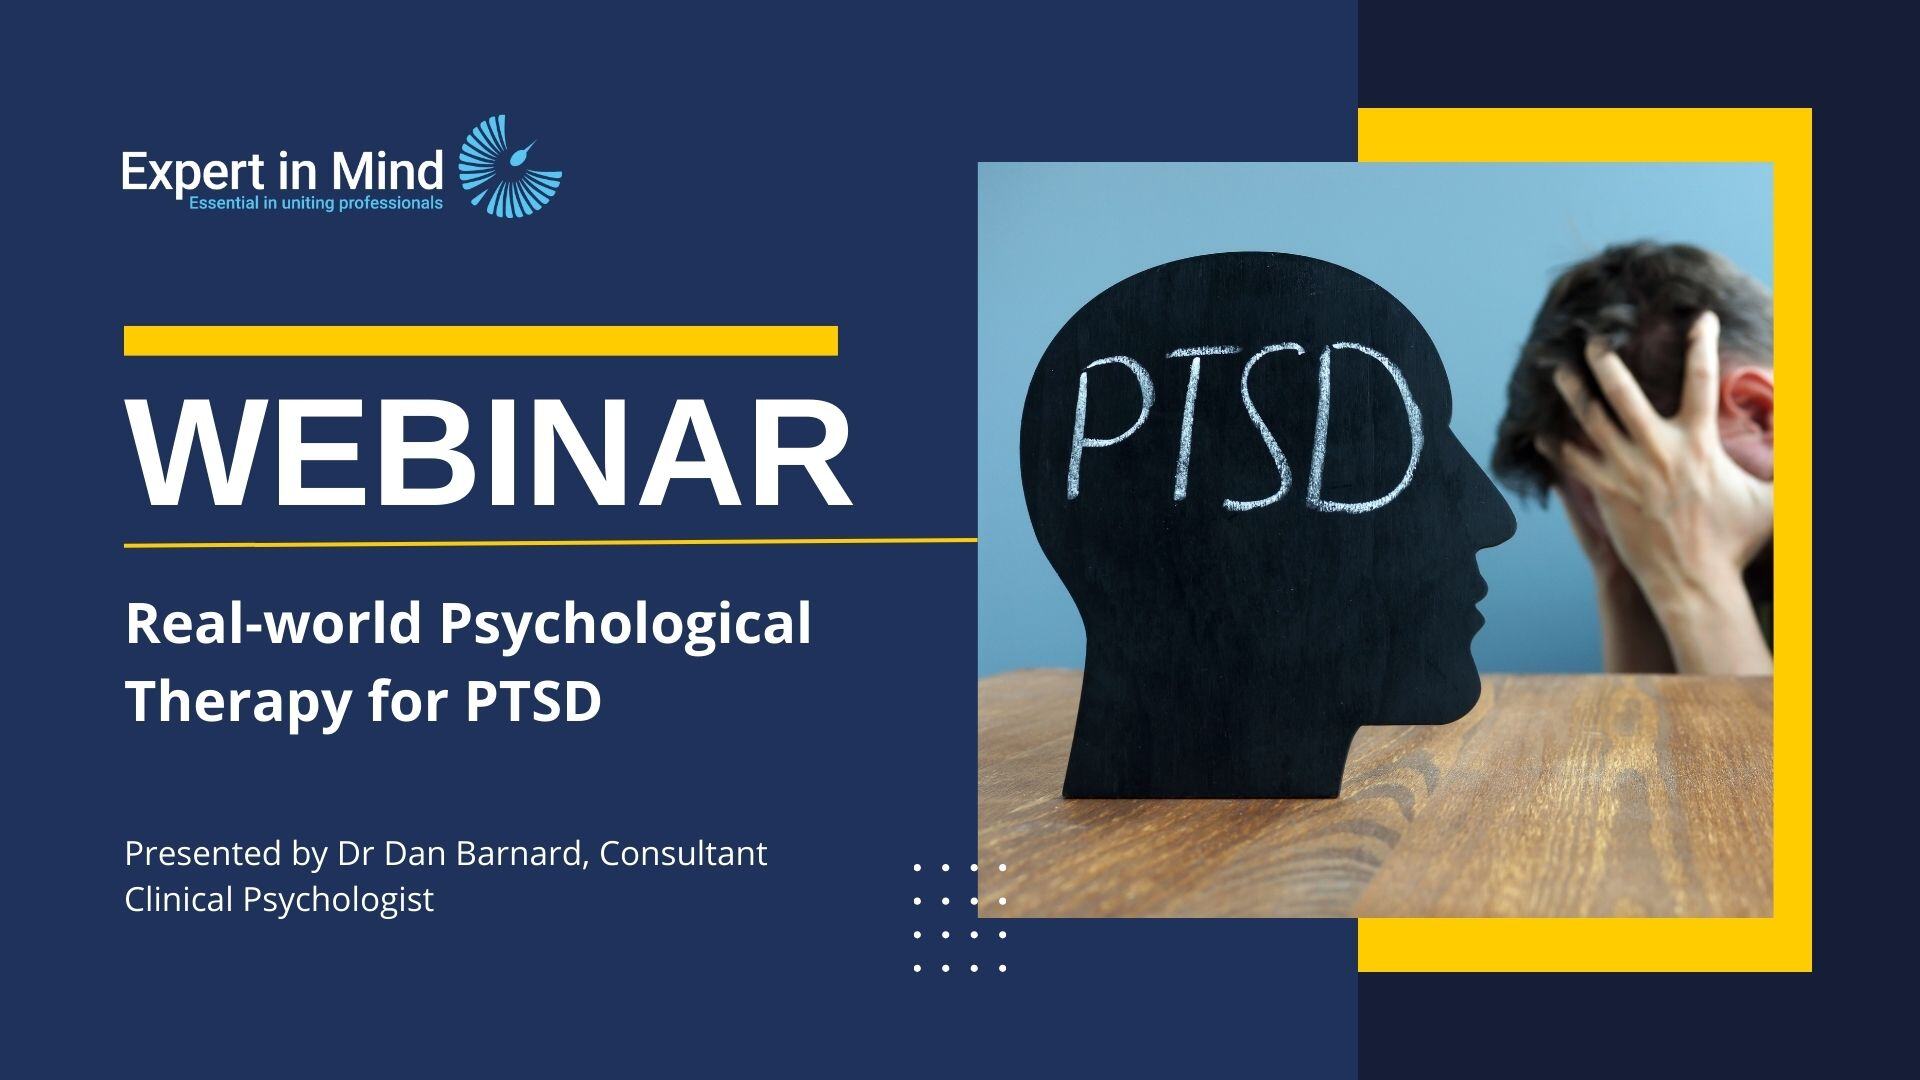 Real-world Psychological Therapy for PTSD